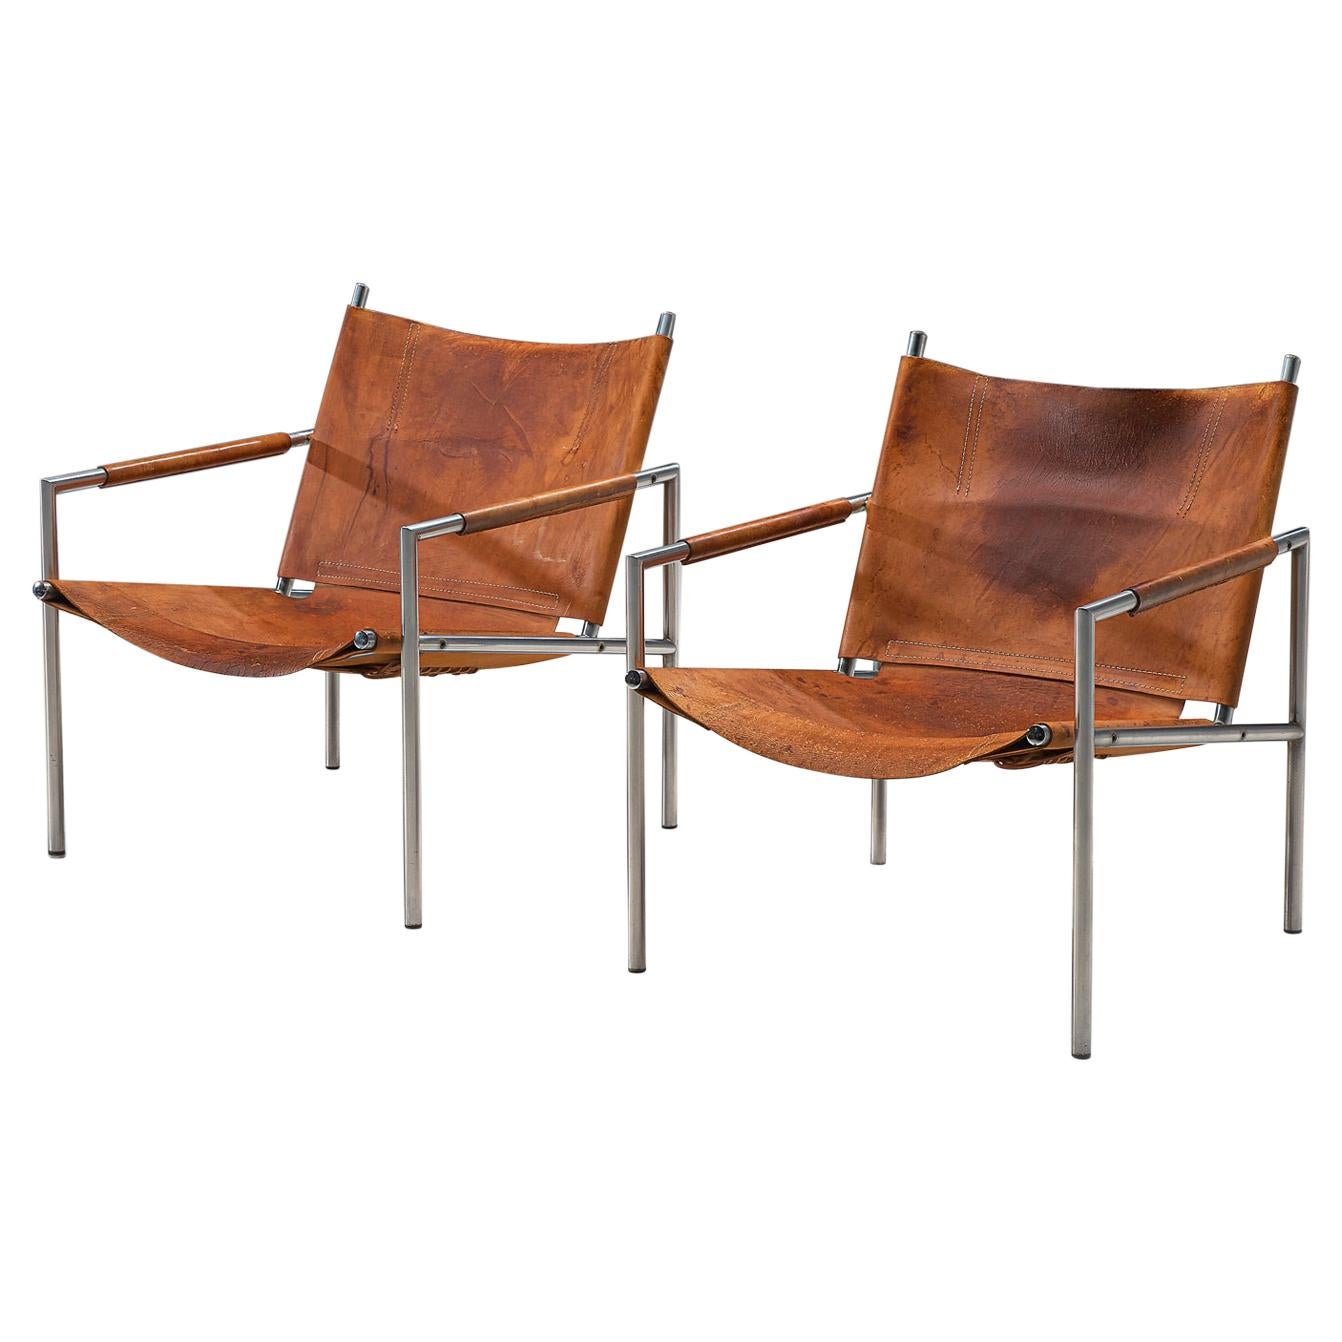 Pair of Armchairs in Patinated Cognac Leather by Martin Visser